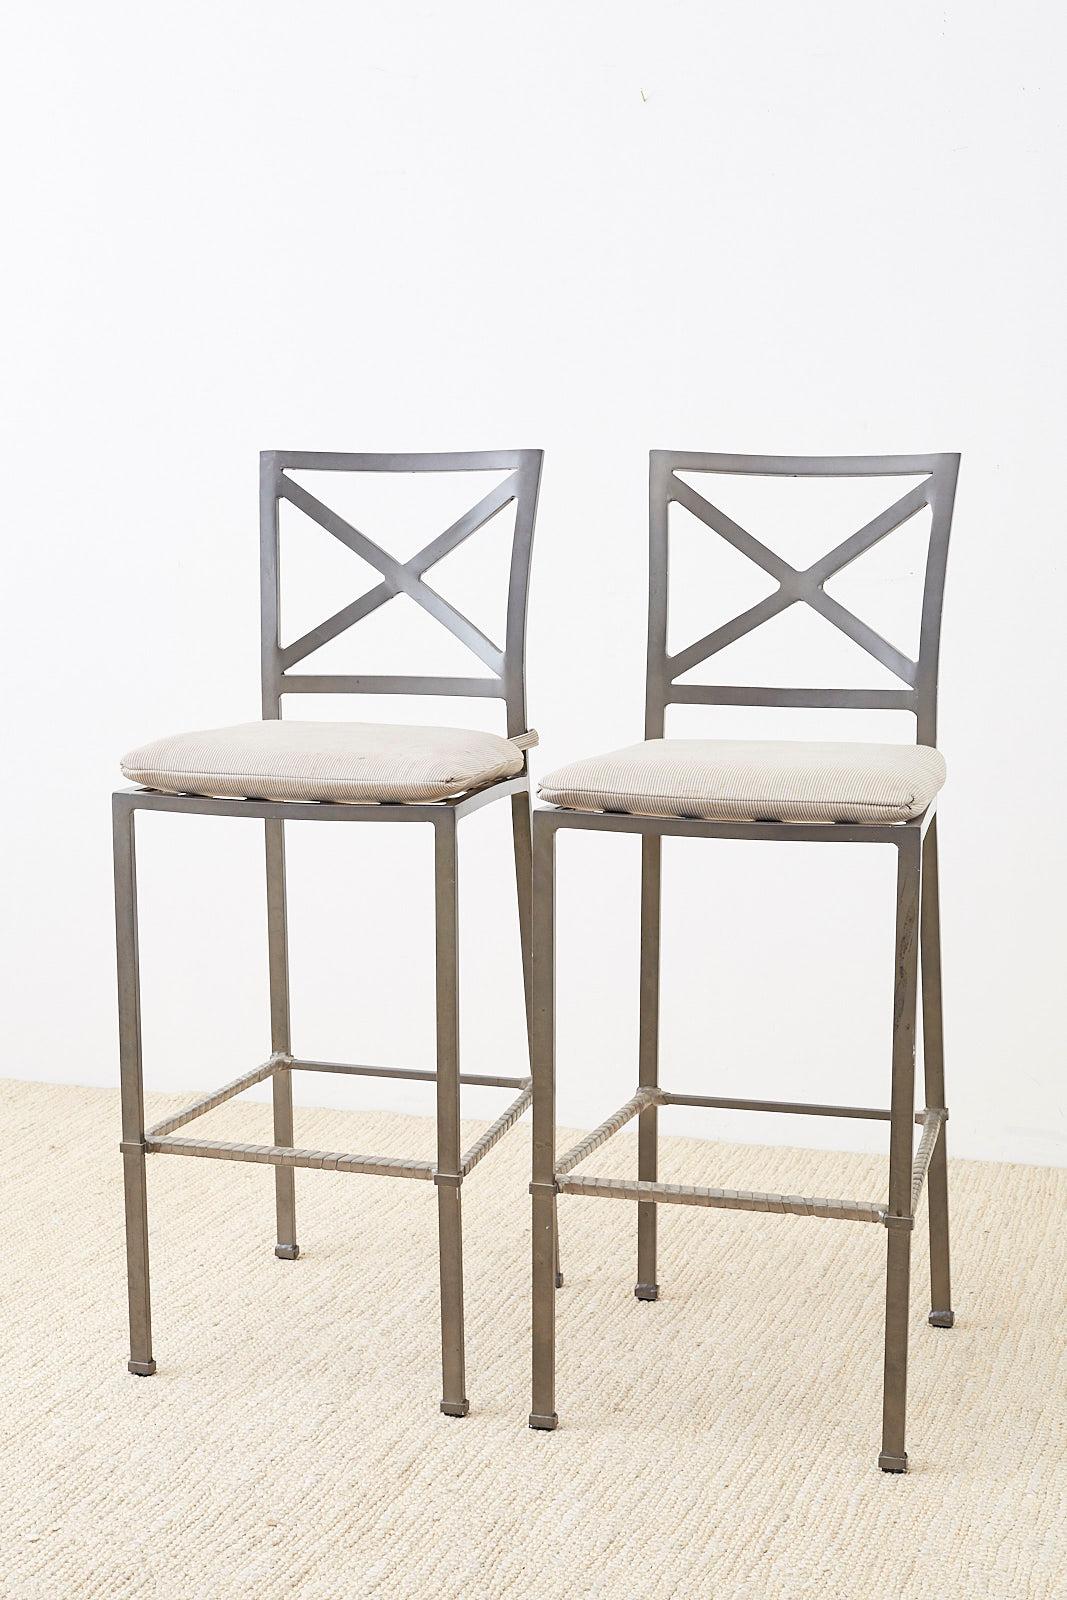 Powder-coated pair of patio garden barstools by Brown Jordan. Constructed from aluminum and finished in a grey color. Each chair has an X-motif square back and straight legs with a box stretcher footrest. Designed by Richard Frinier and known as the